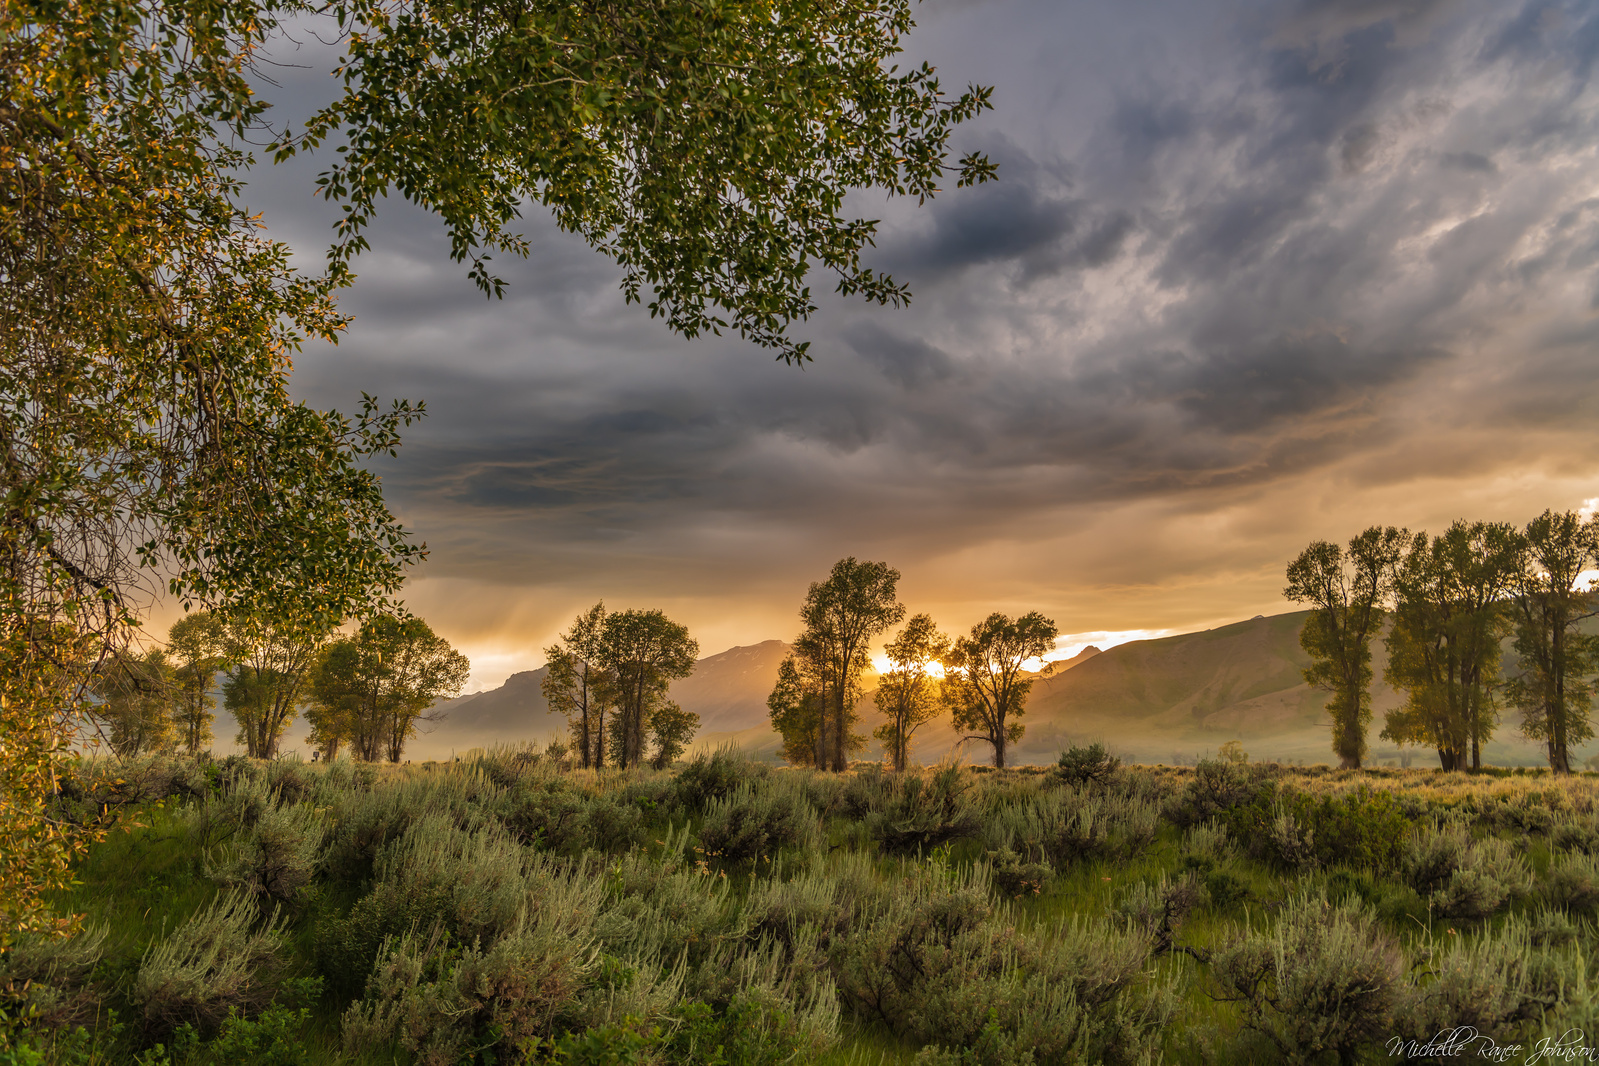 Golden light coming through during a thunderstorm over the Grand Tetons at Gros Ventre Campground, Wyoming. Fine art image.